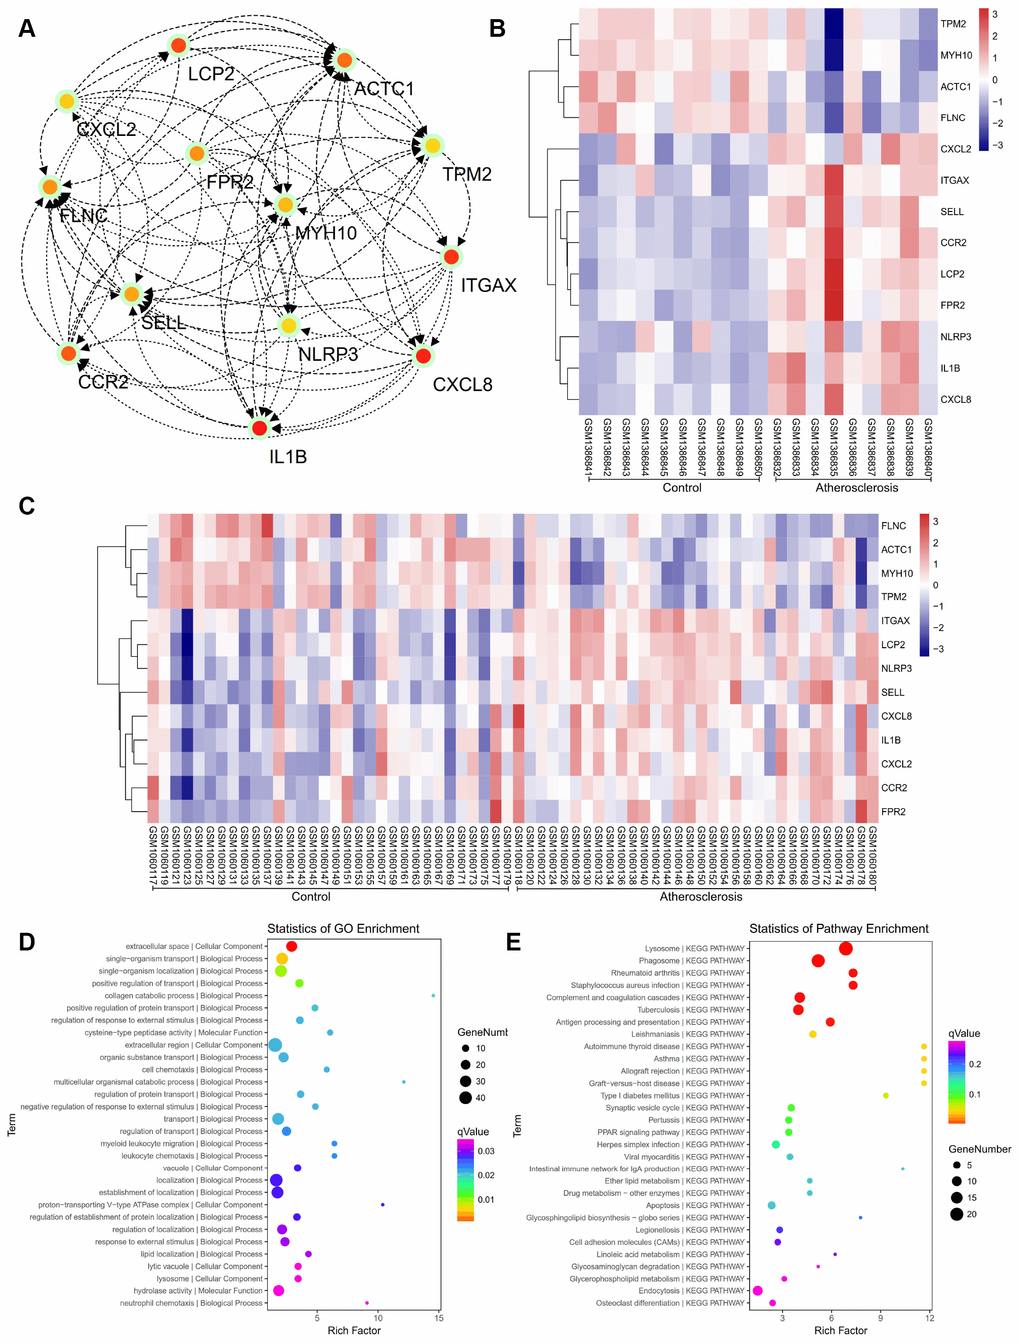 (A) The hub genes were identified from the PPI network. (B, C) Hierarchical clustering demonstrated that the hub genes could effectively differentiate the atherosclerotic samples from the non-atherosclerotic samples in the GSE57691 and GSE43292 datasets. The upregulated genes are marked in pink, the downregulated genes are marked in blue. (D) The GO enrichment analyses of DEGs of our private dataset. (E) The KEGG pathway analysis of DEGs of our private dataset.